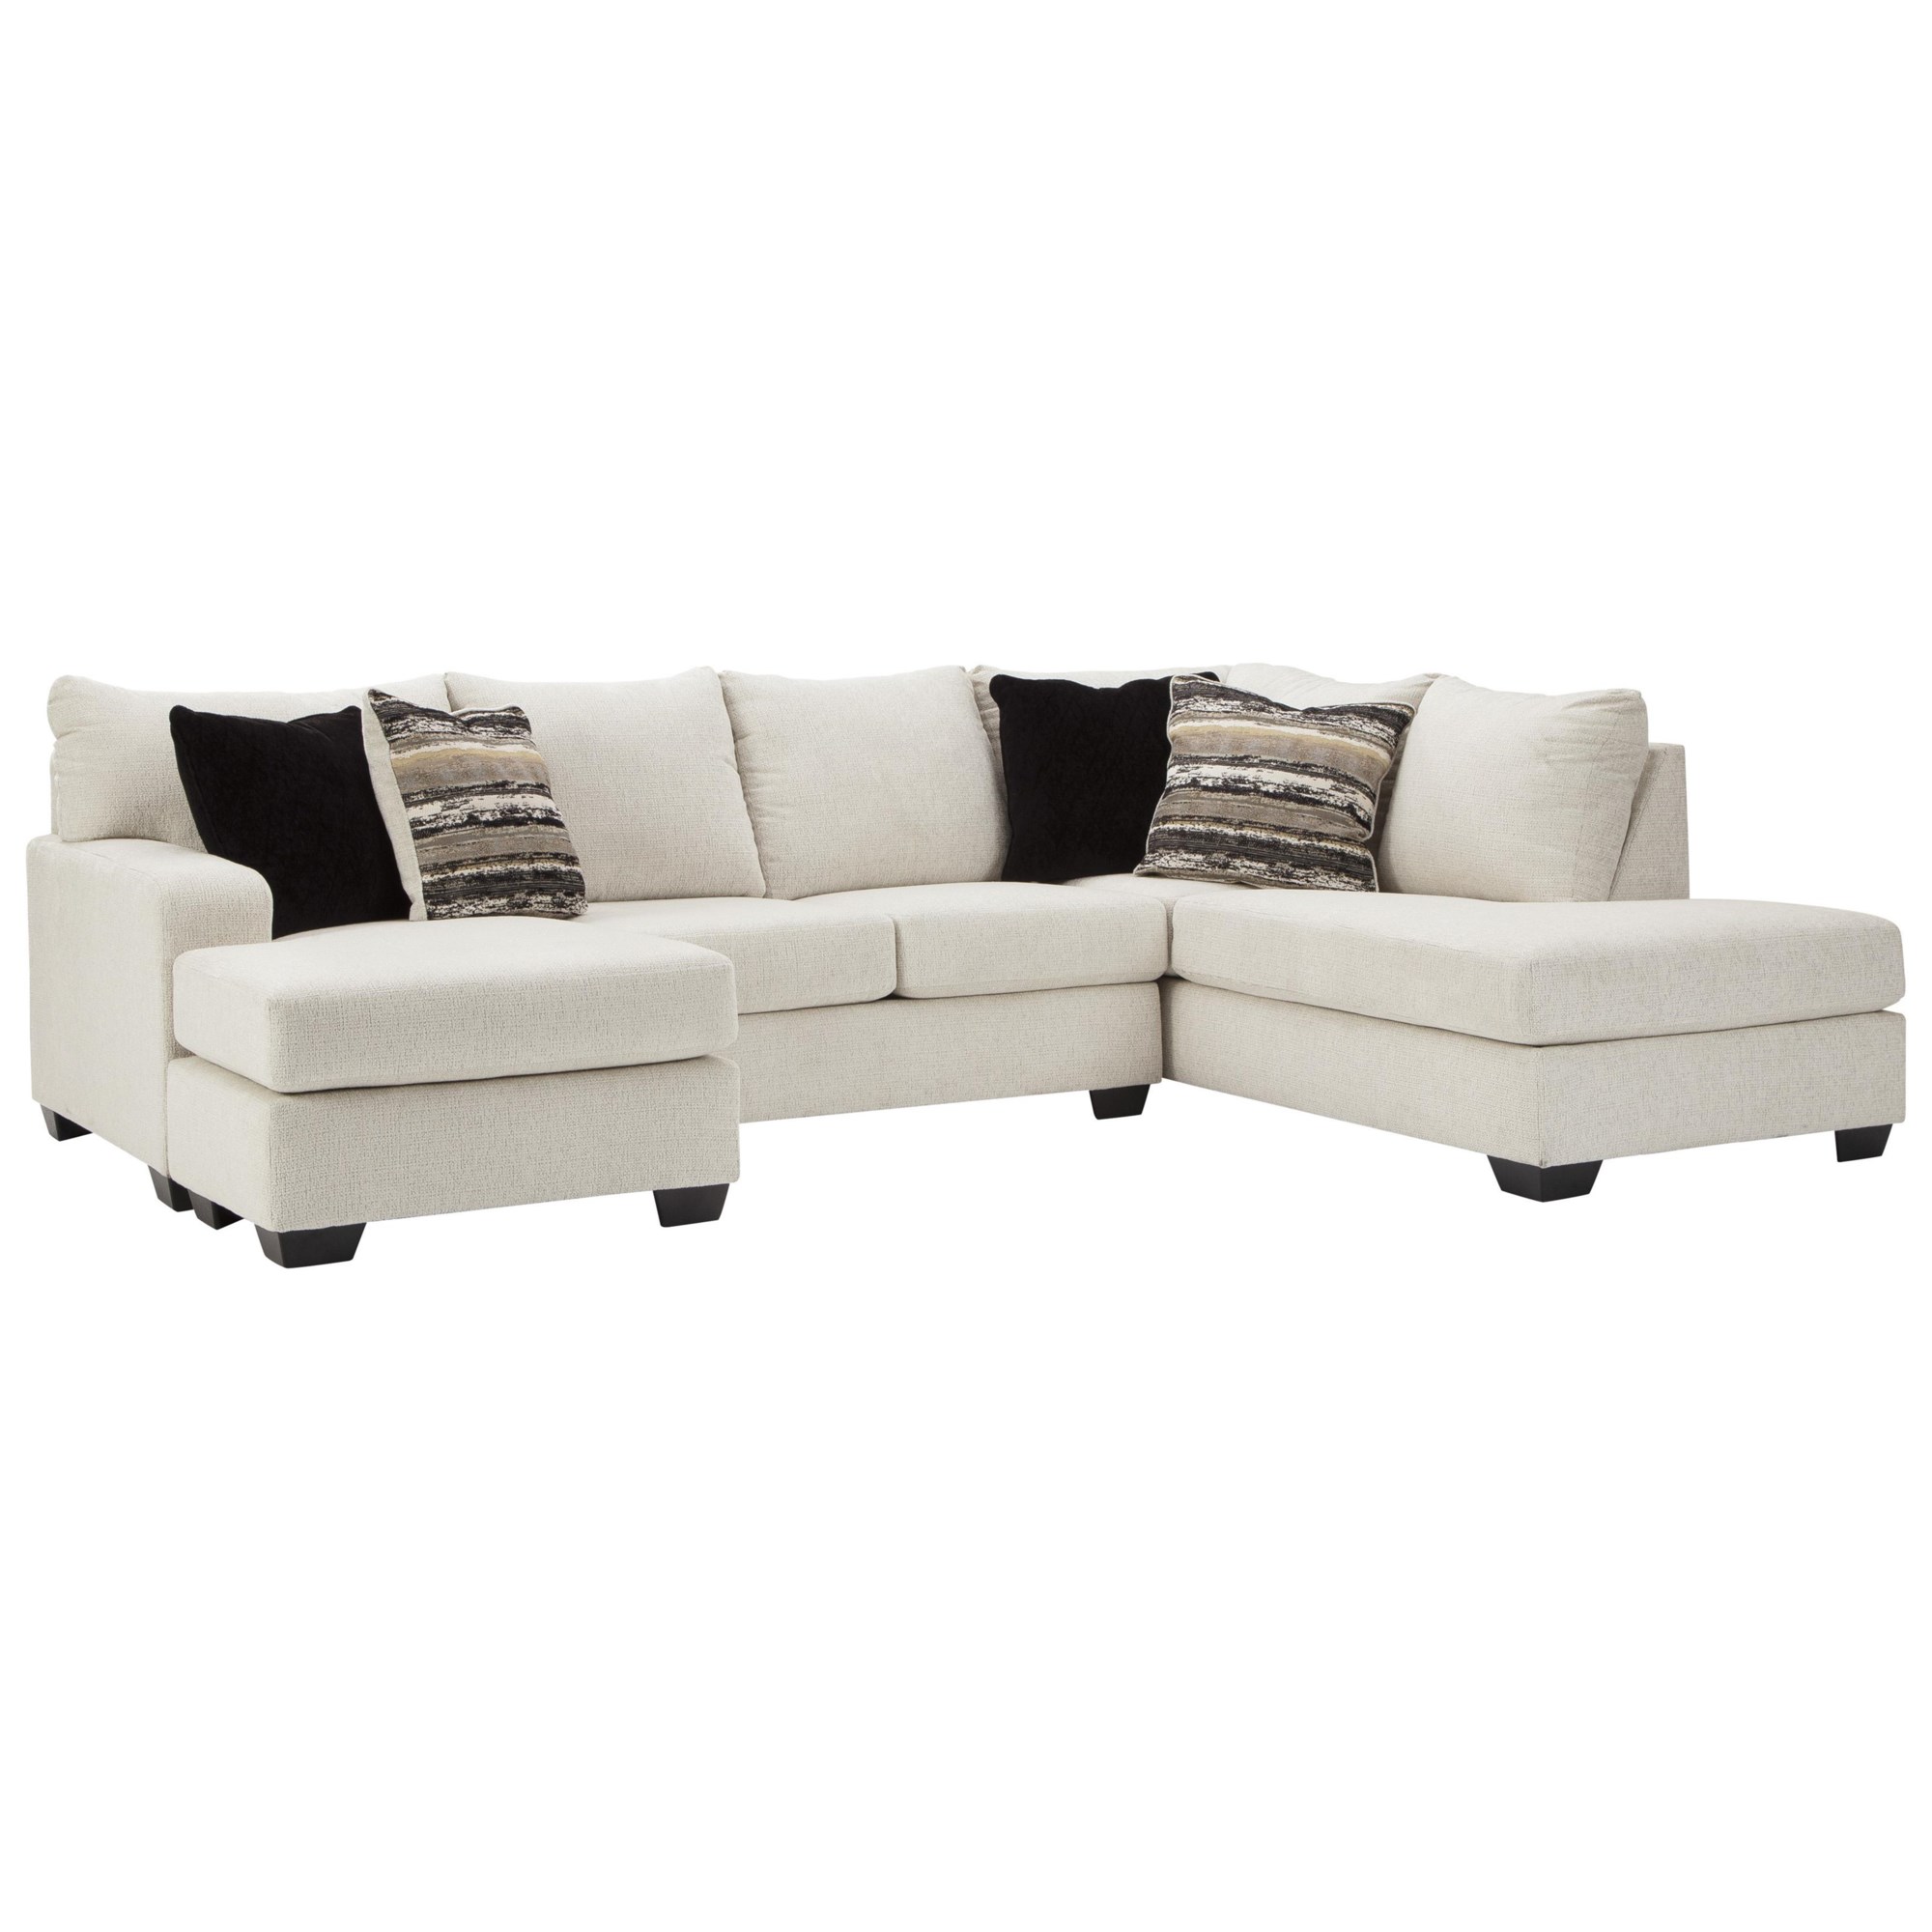 Cambri 2-Piece Sectional with Chaise